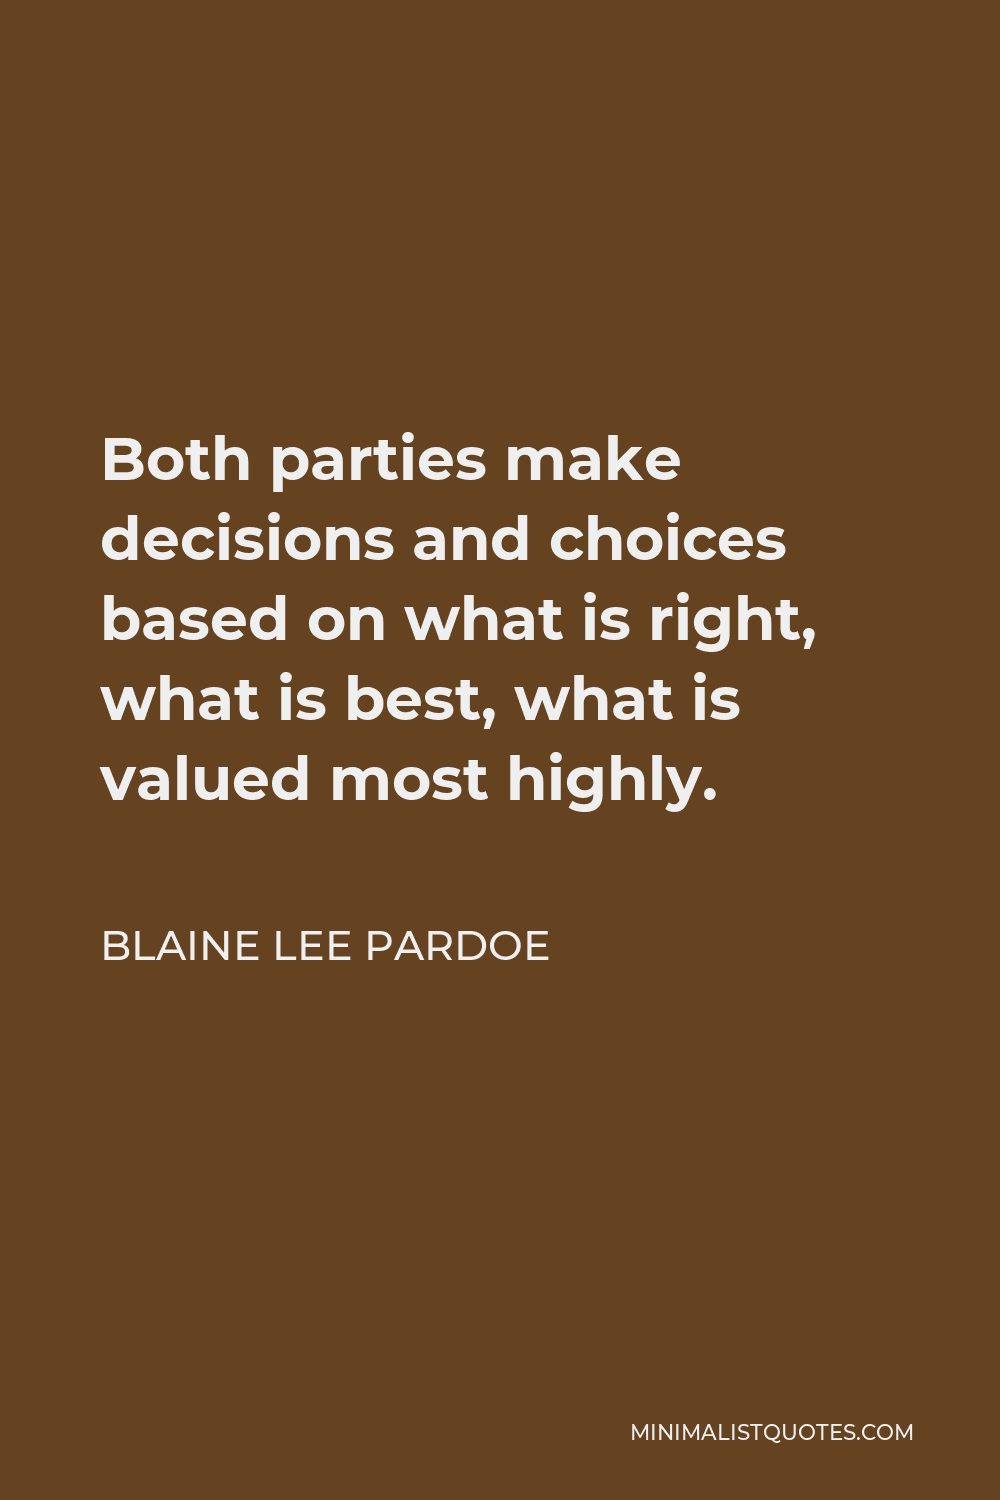 Blaine Lee Pardoe Quote - Both parties make decisions and choices based on what is right, what is best, what is valued most highly.